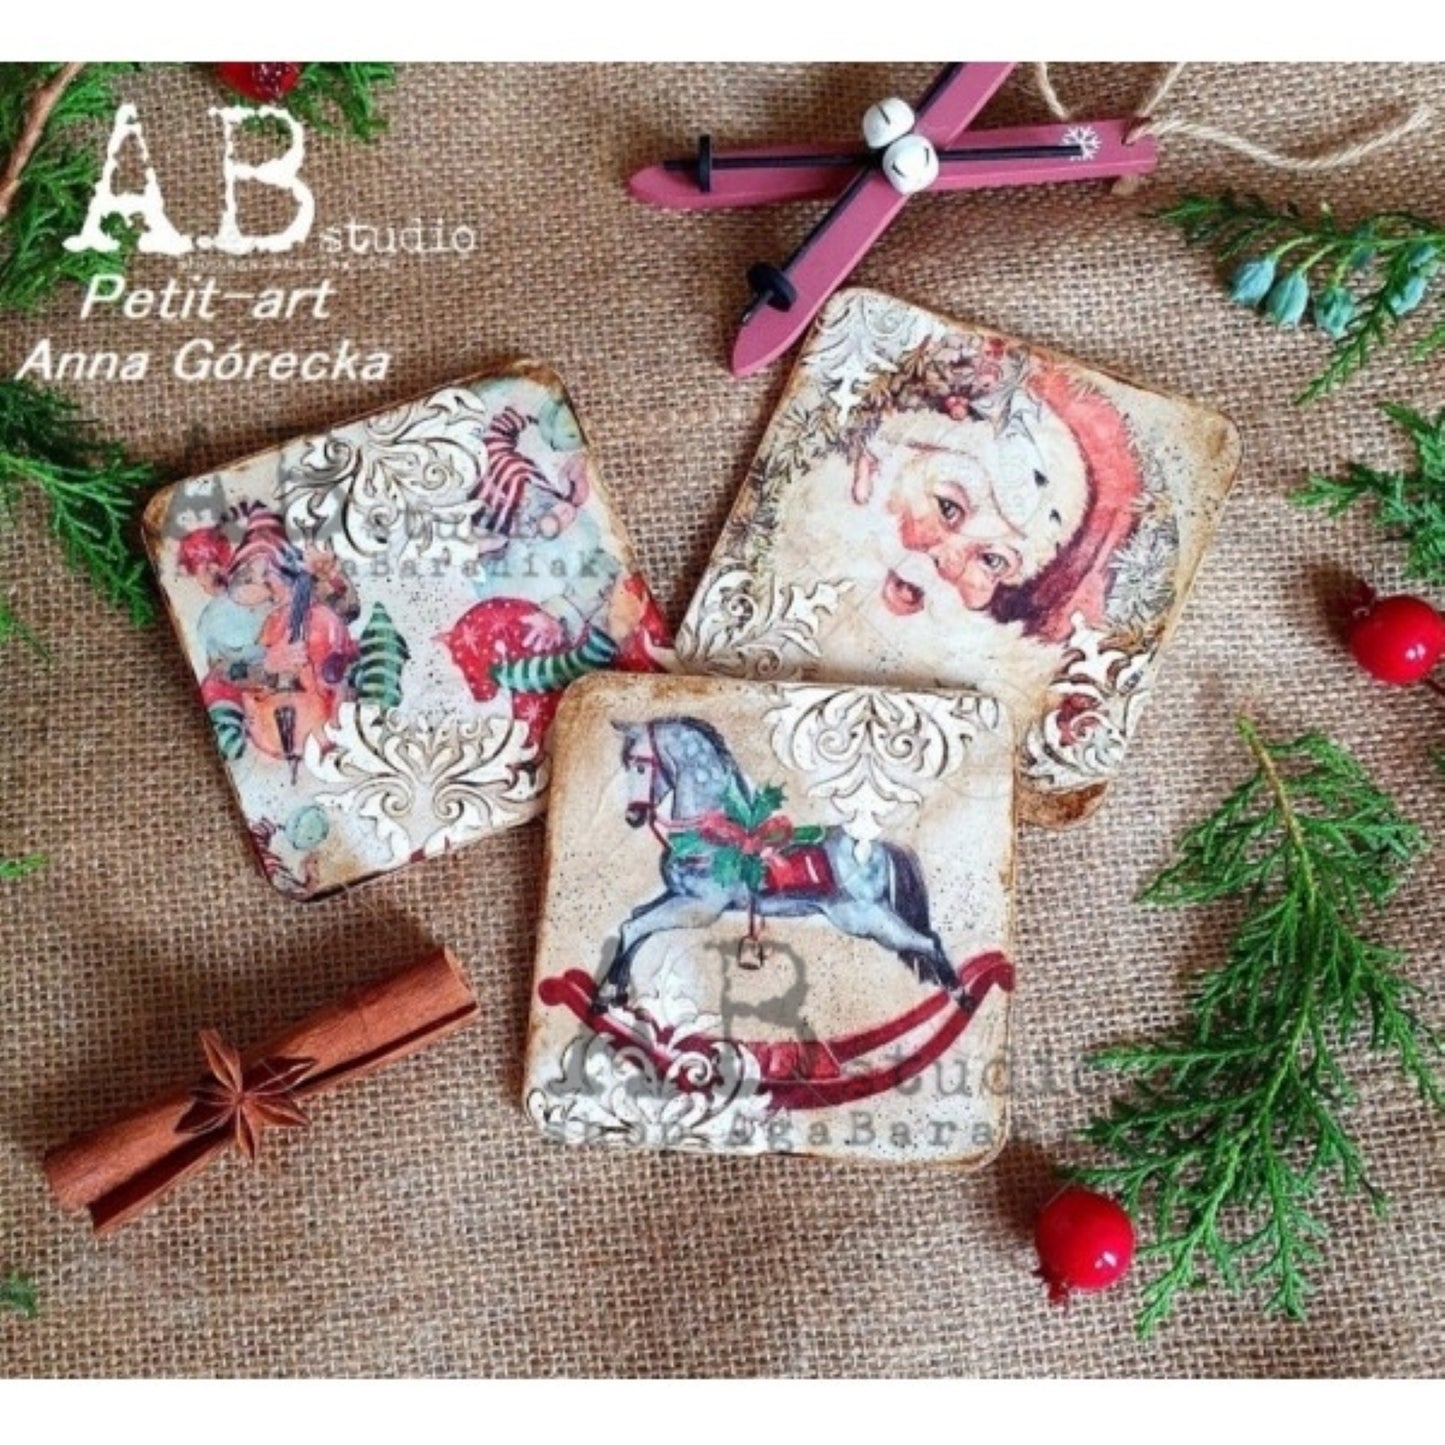 AB Studio Christmas Vintage Santa Rounds 0344 Size: A4 - 8.27 X 11.69 inches Rice Paper for Decoupage Imported from Poland